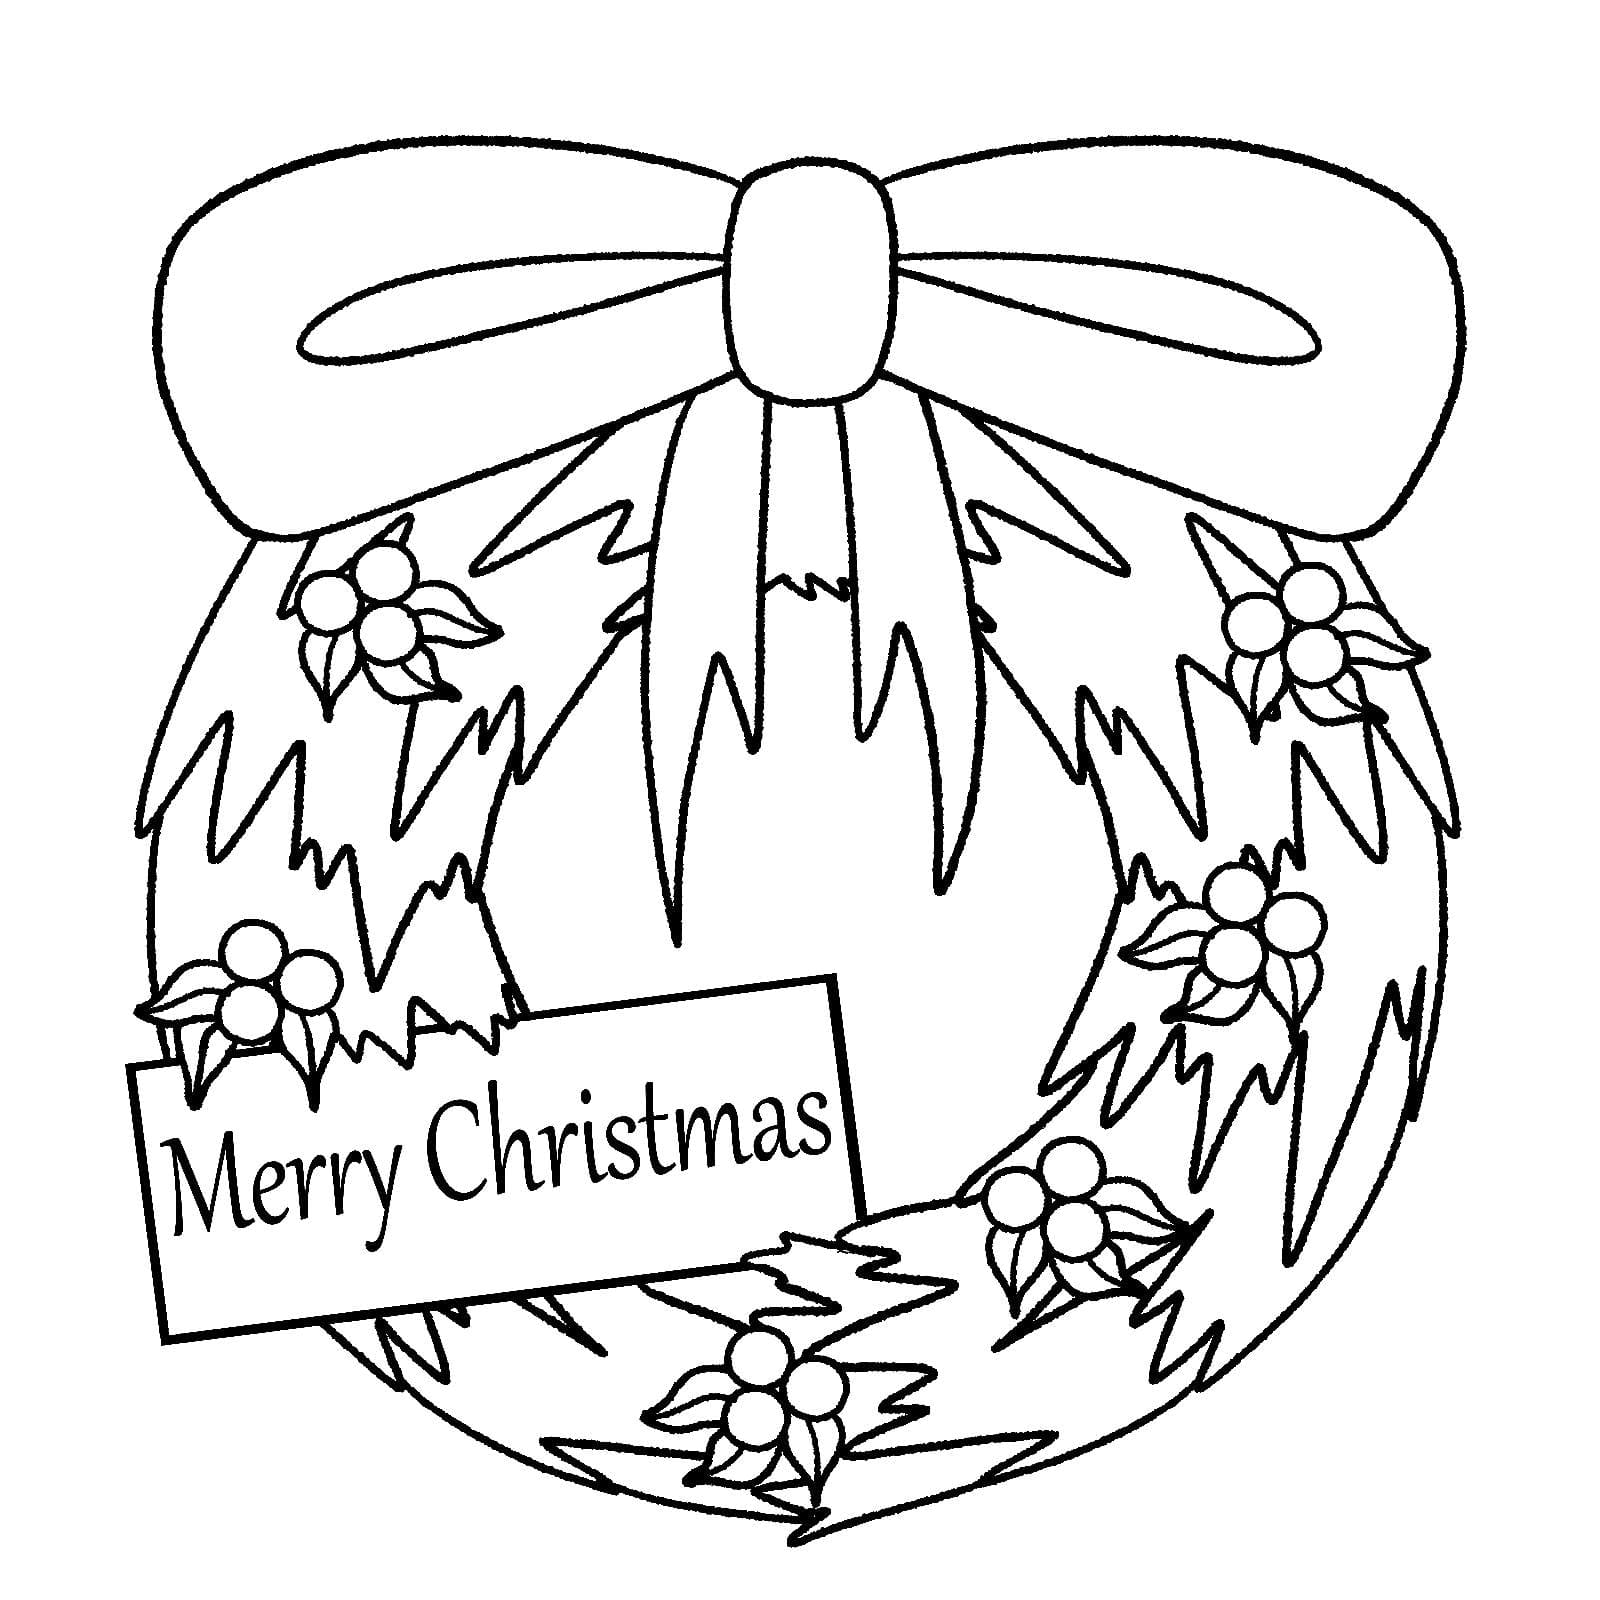 Christmas coloring page for adult